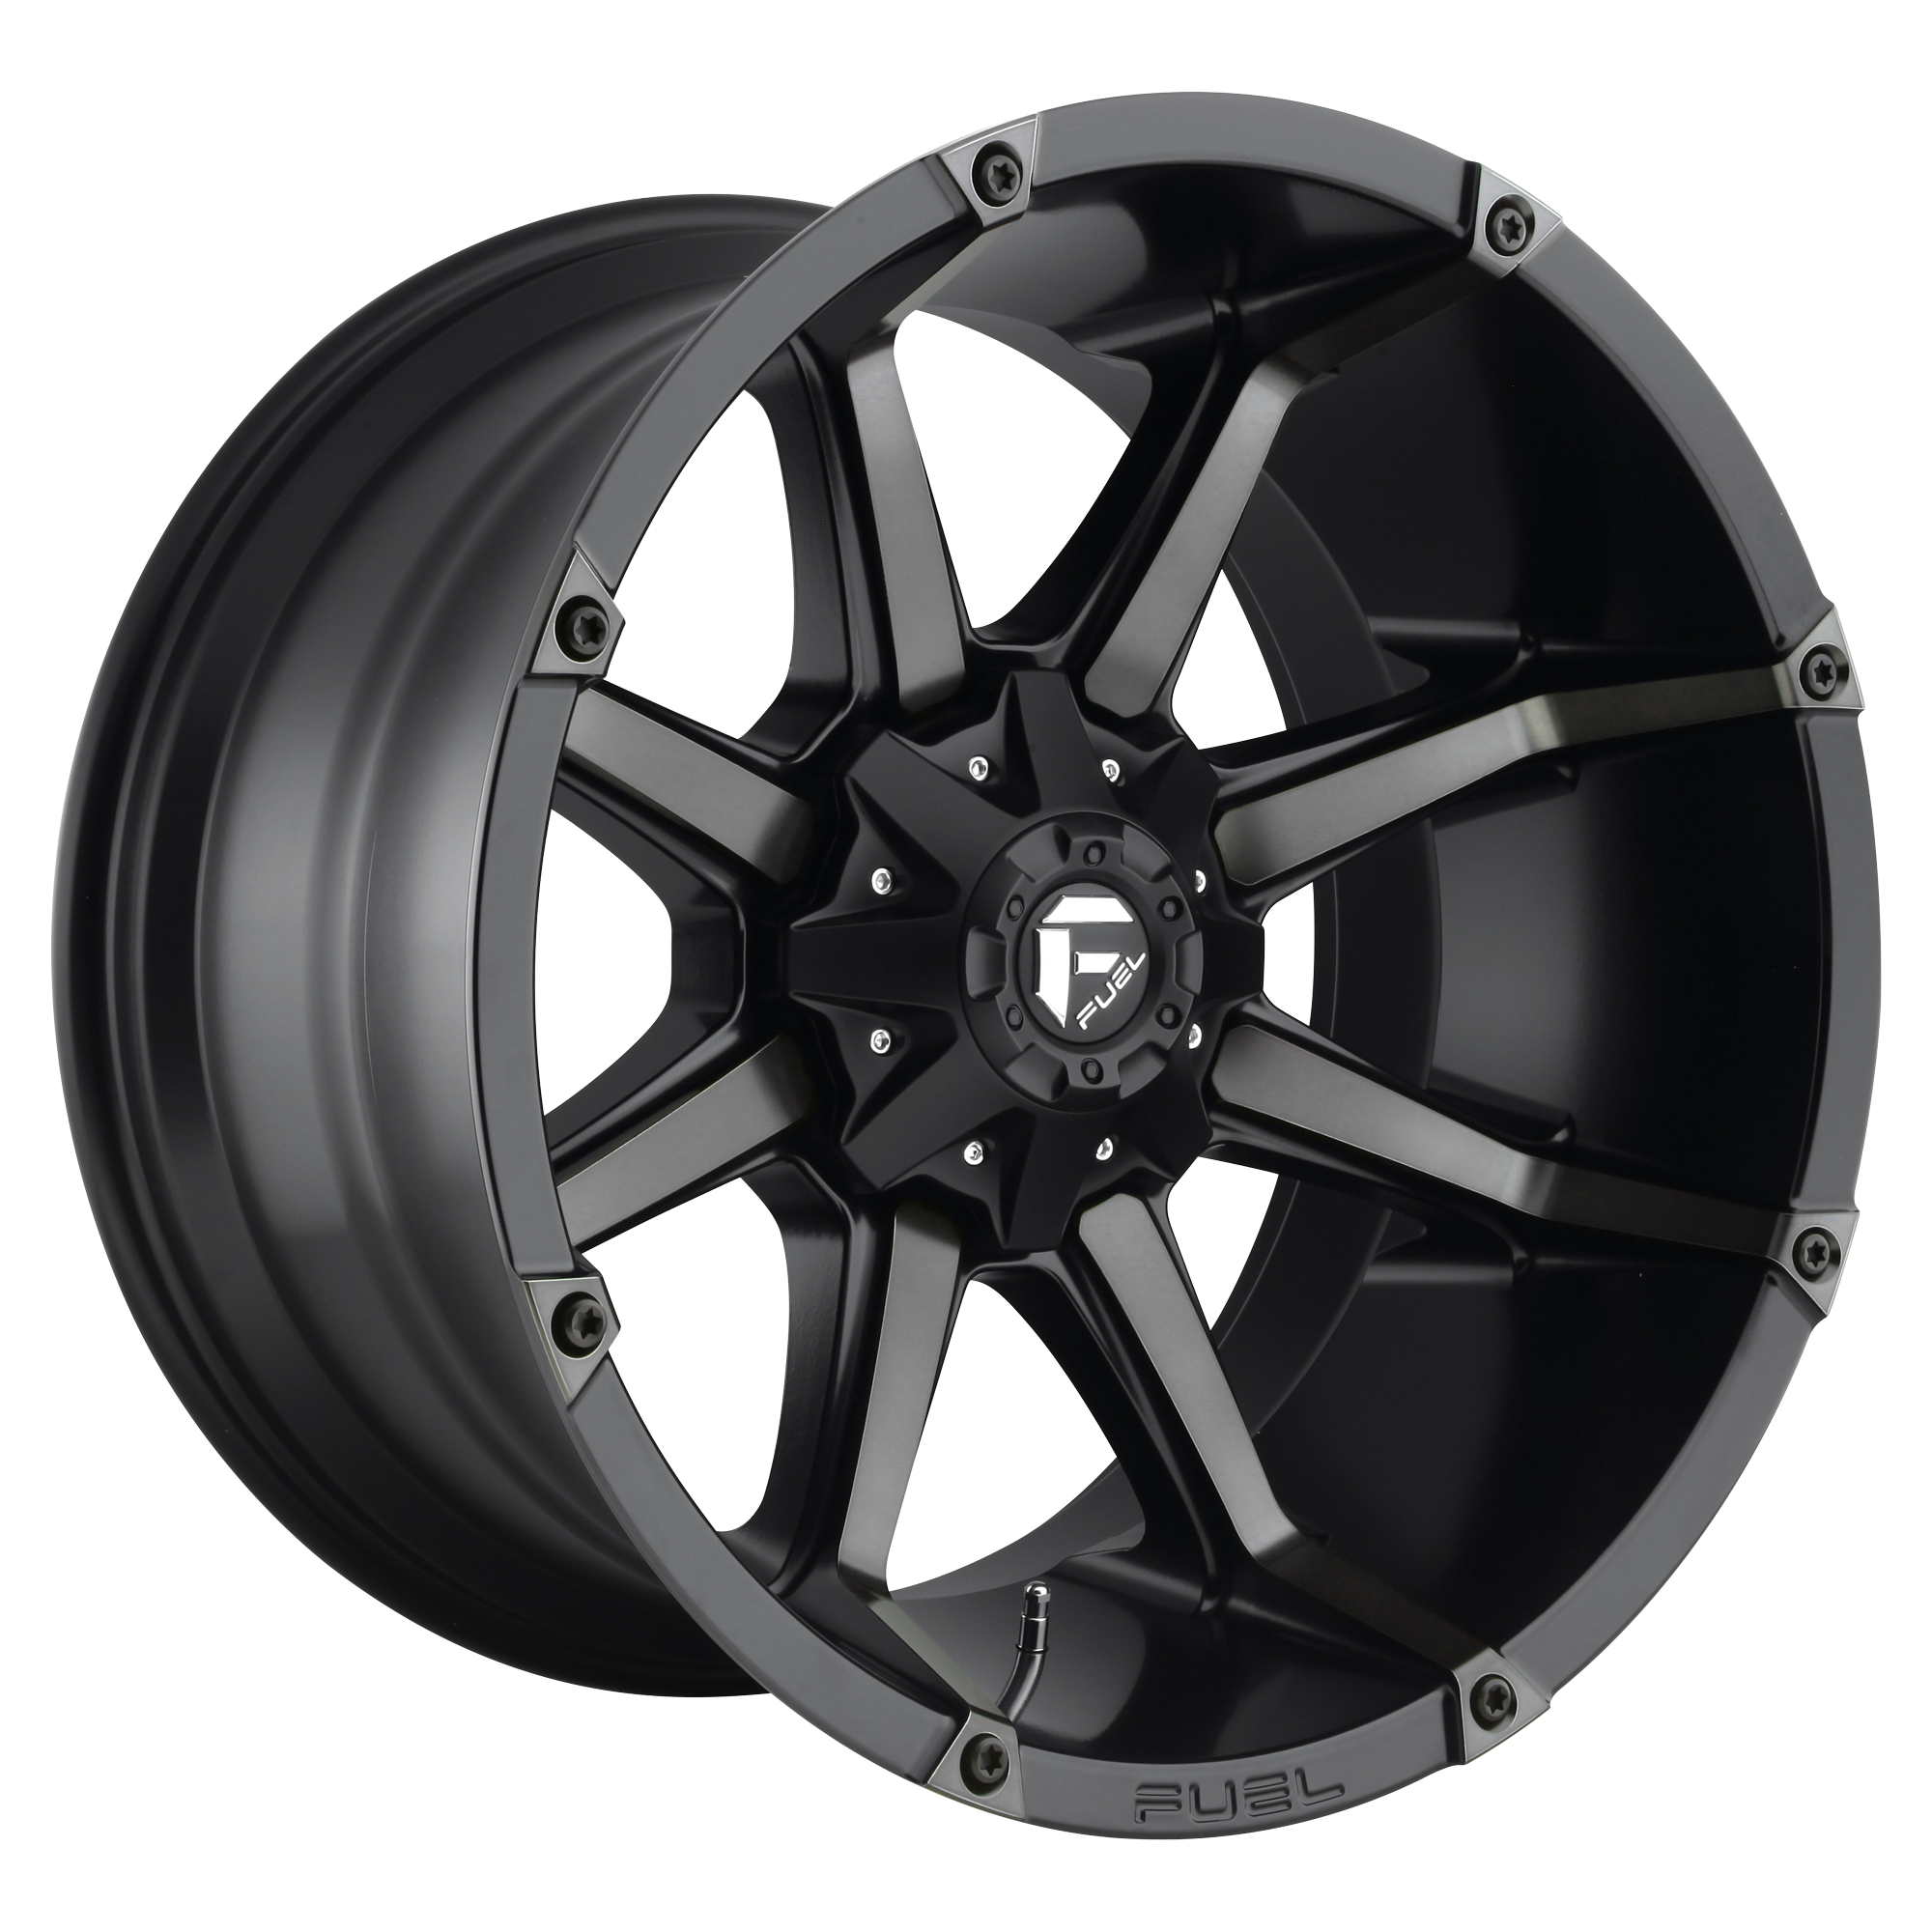 COUPLER 20x9 6x120.00/6x139.70 MATTE BLACK DOUBLE DARK TINT (19 mm) - Tires and Engine Performance